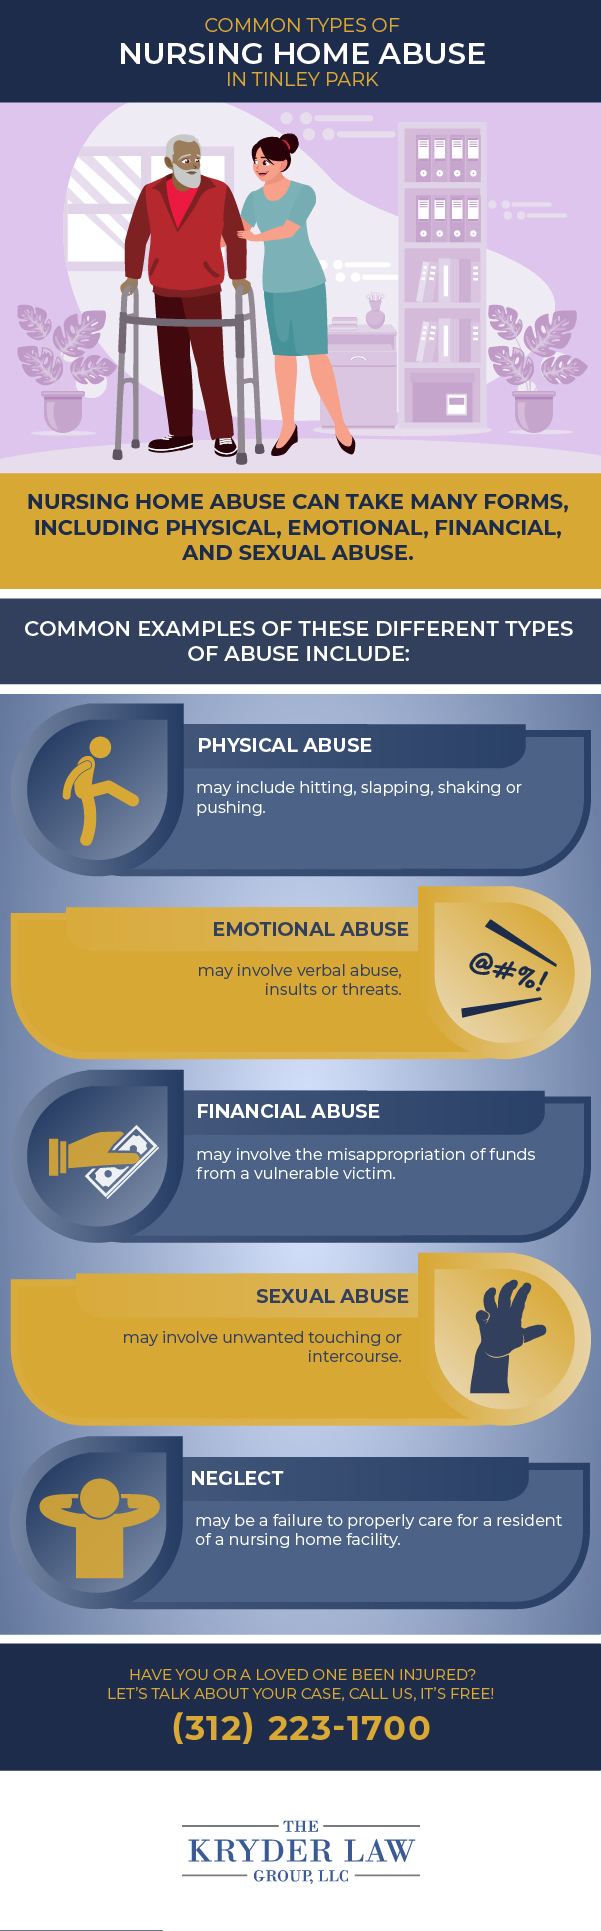 Common Types of Nursing Home Abuse in Tinley Park